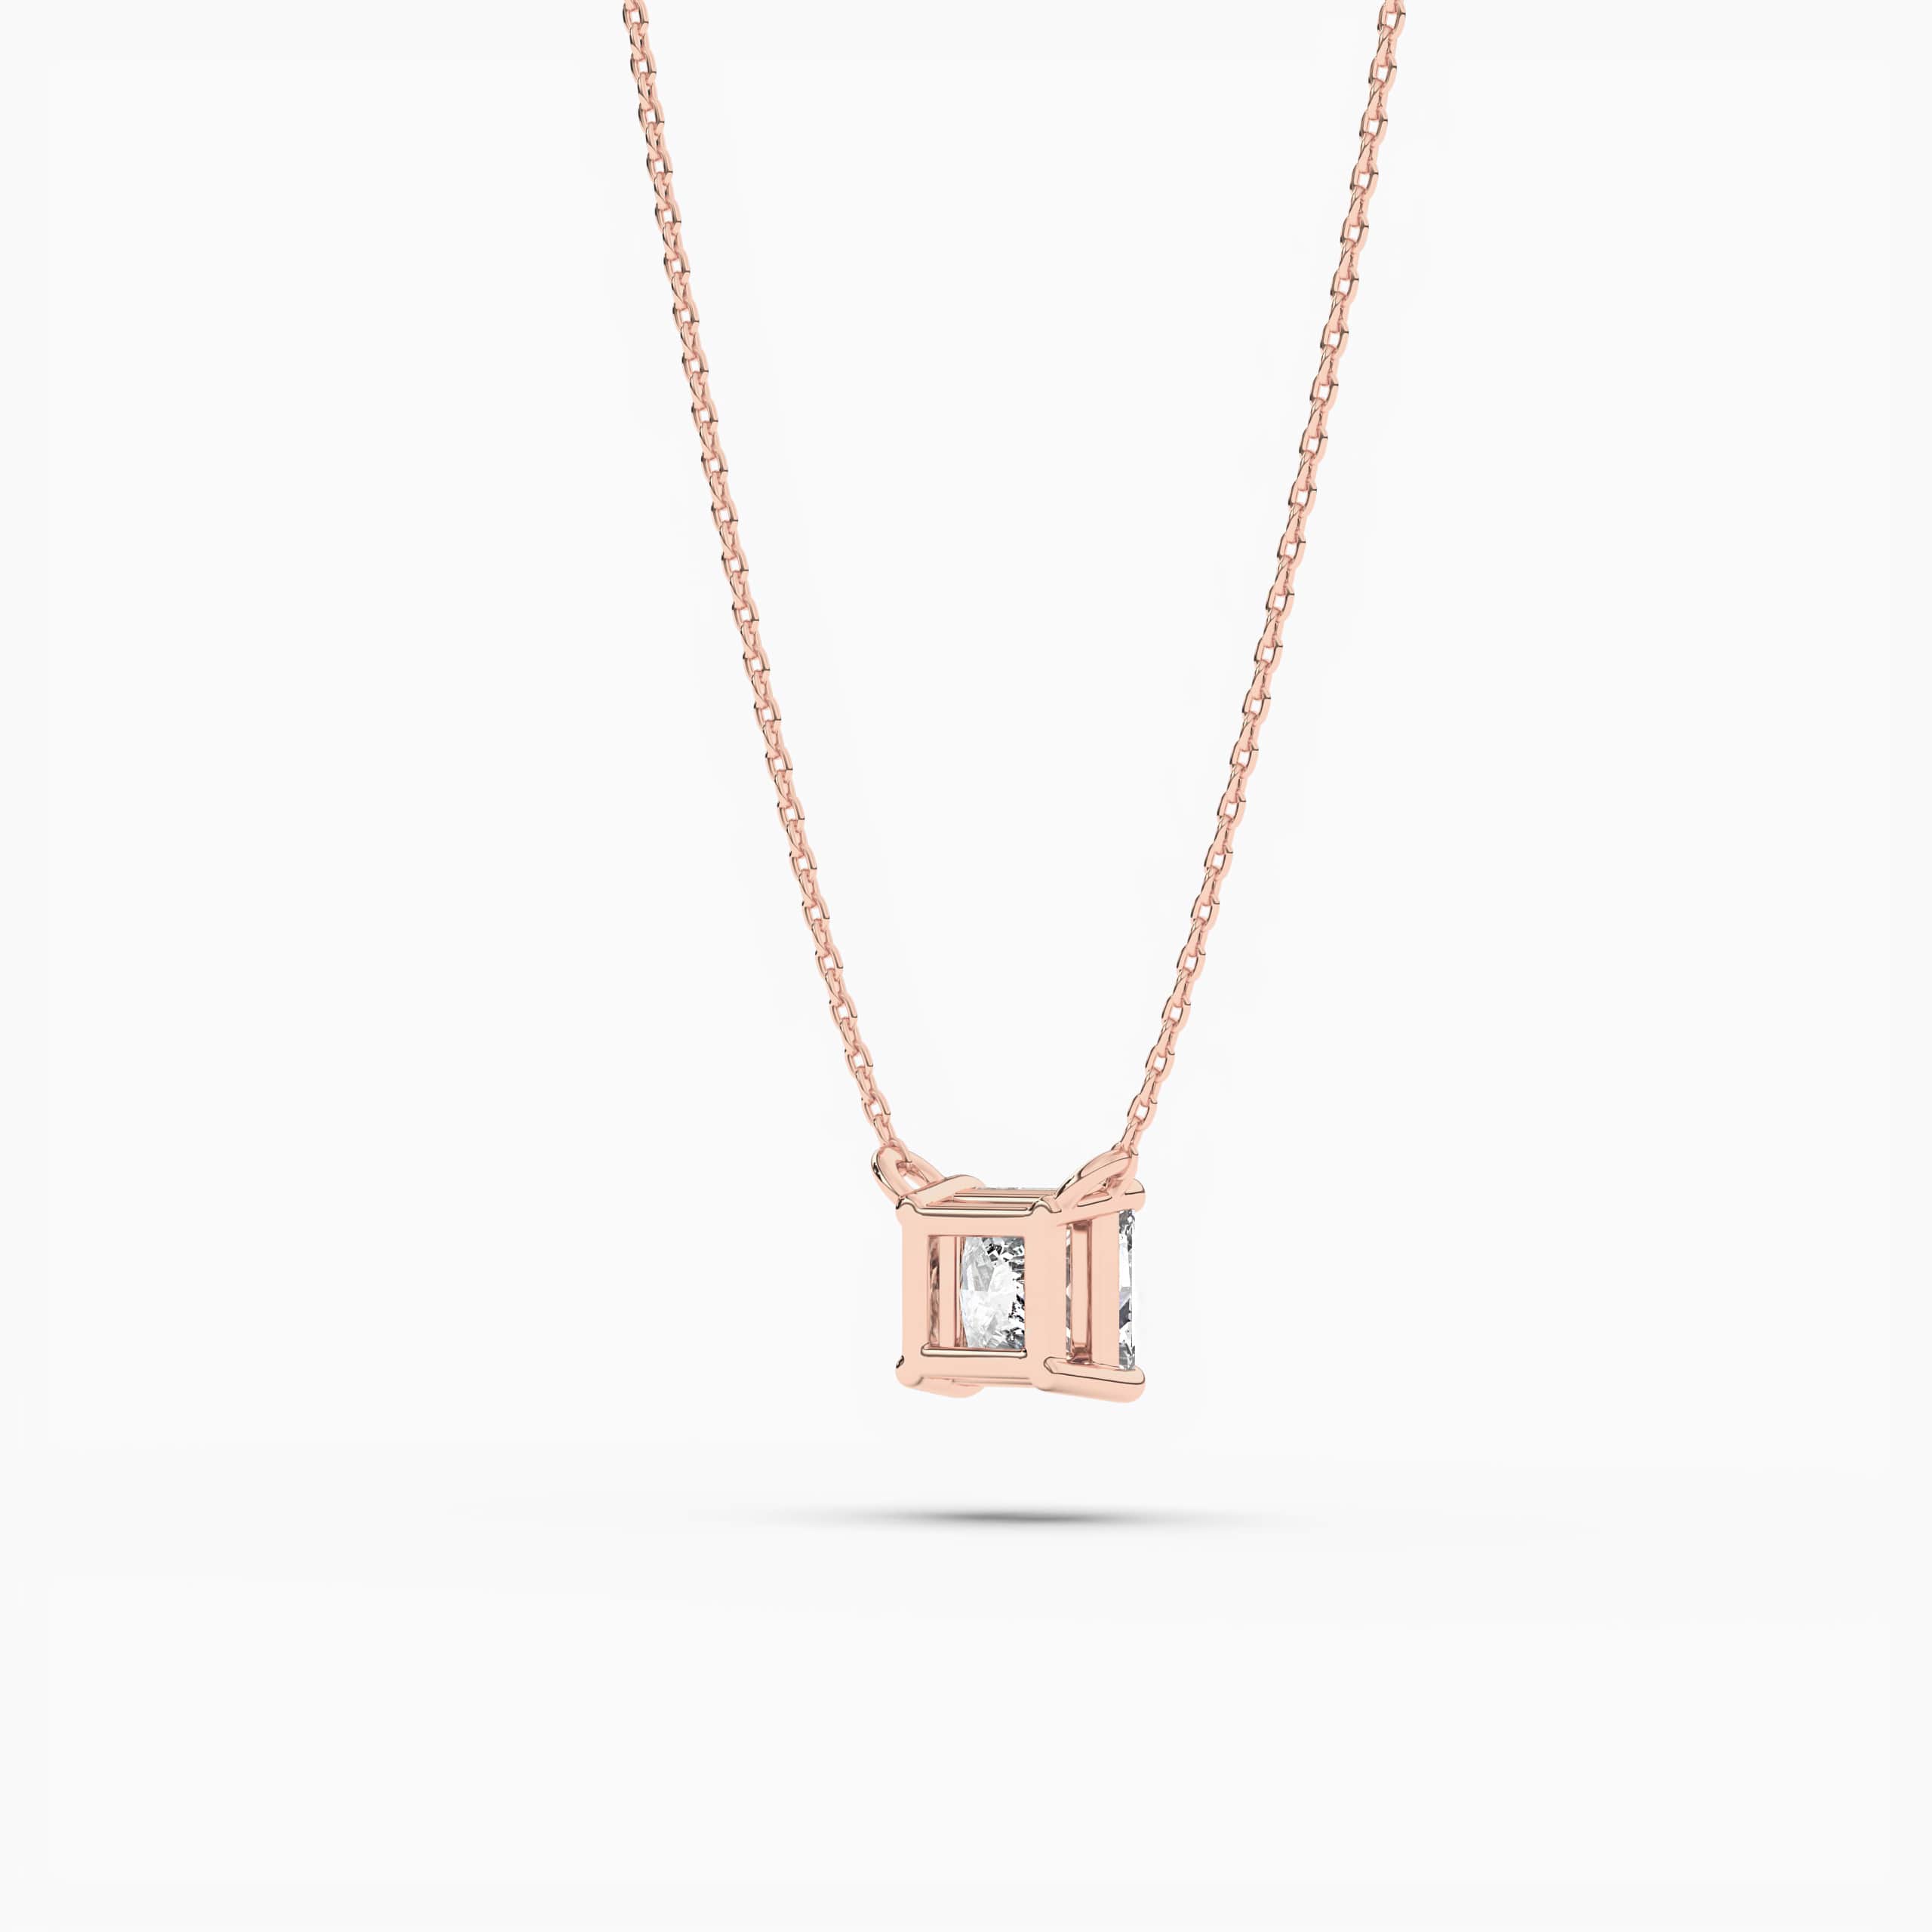 Princess Diamond Necklace in Rose Gold